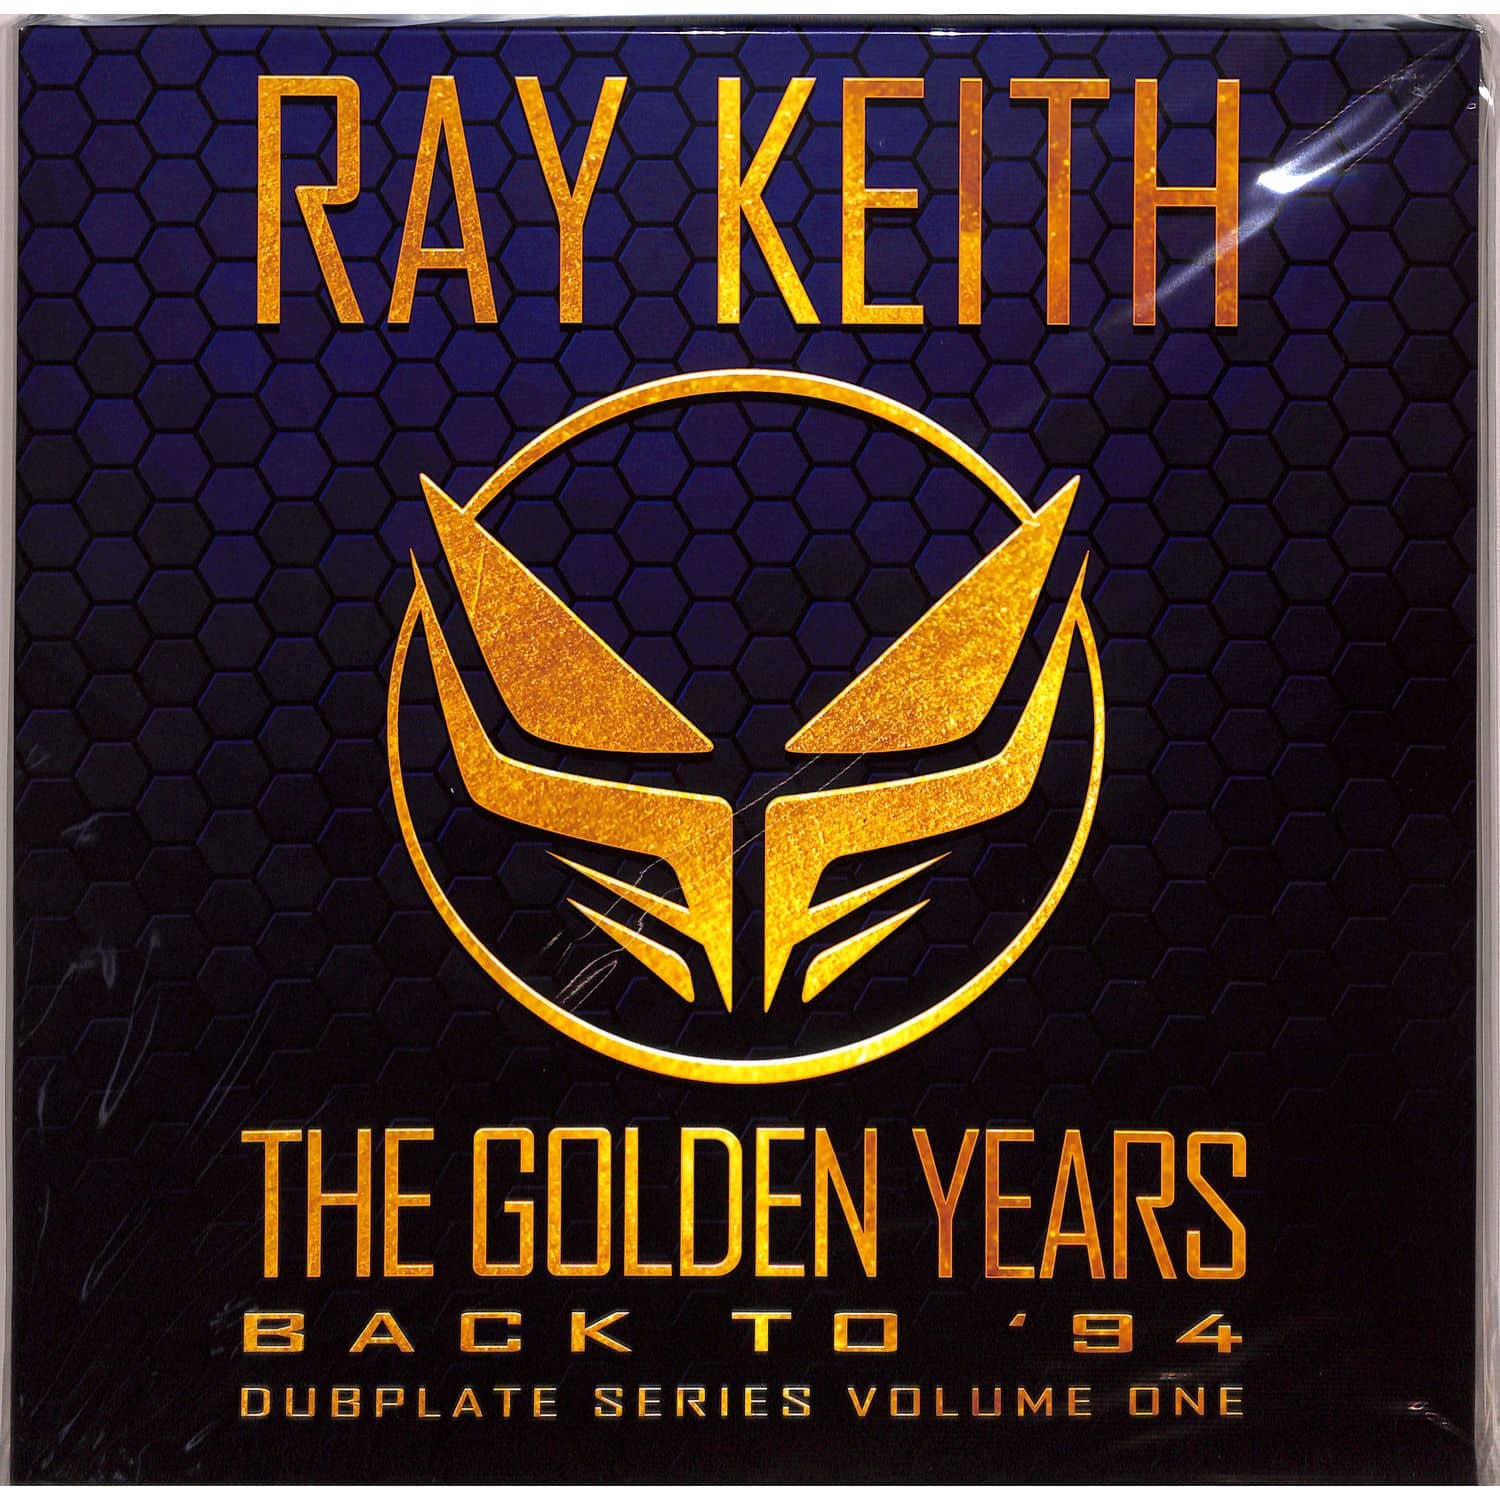 Ray Keith - THE GOLDEN YEARS BACK TO 94 DUBPLATE SERIES BOX SET 